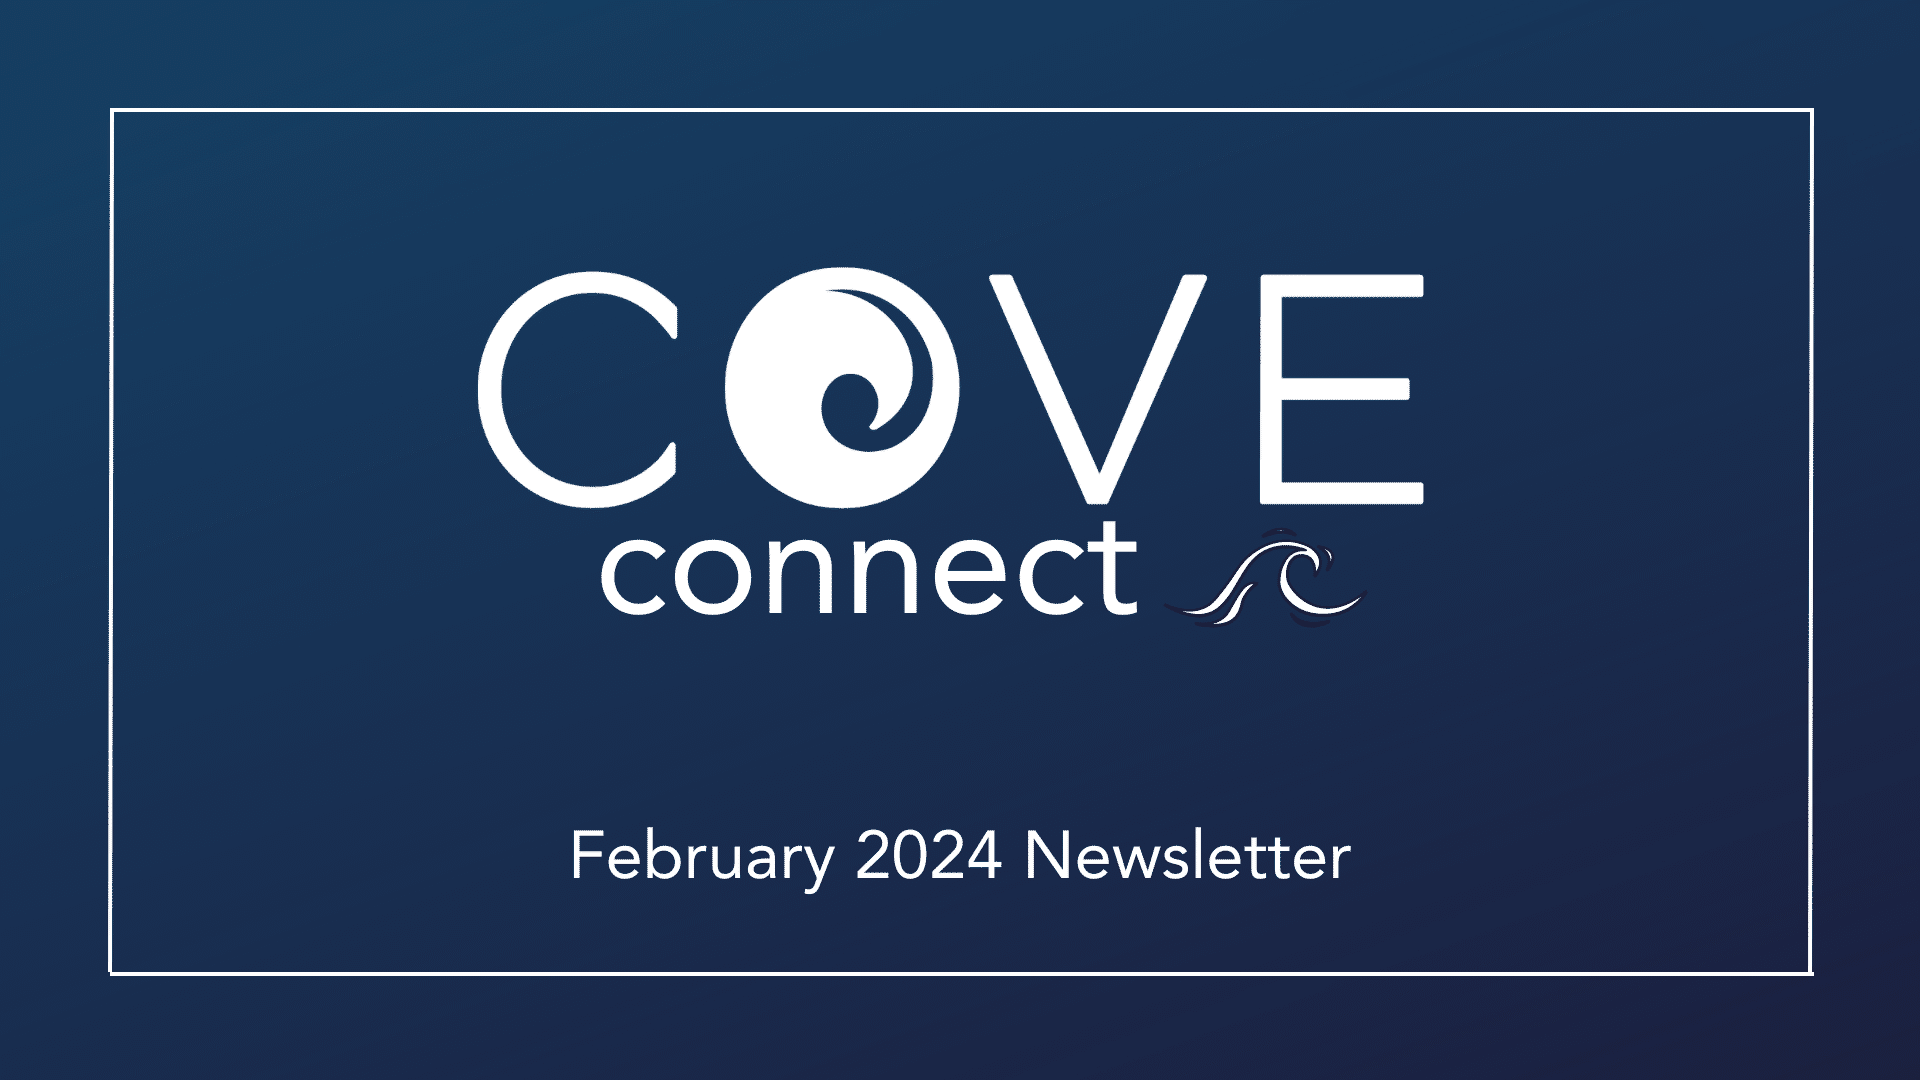 COVE Connect | February 2024